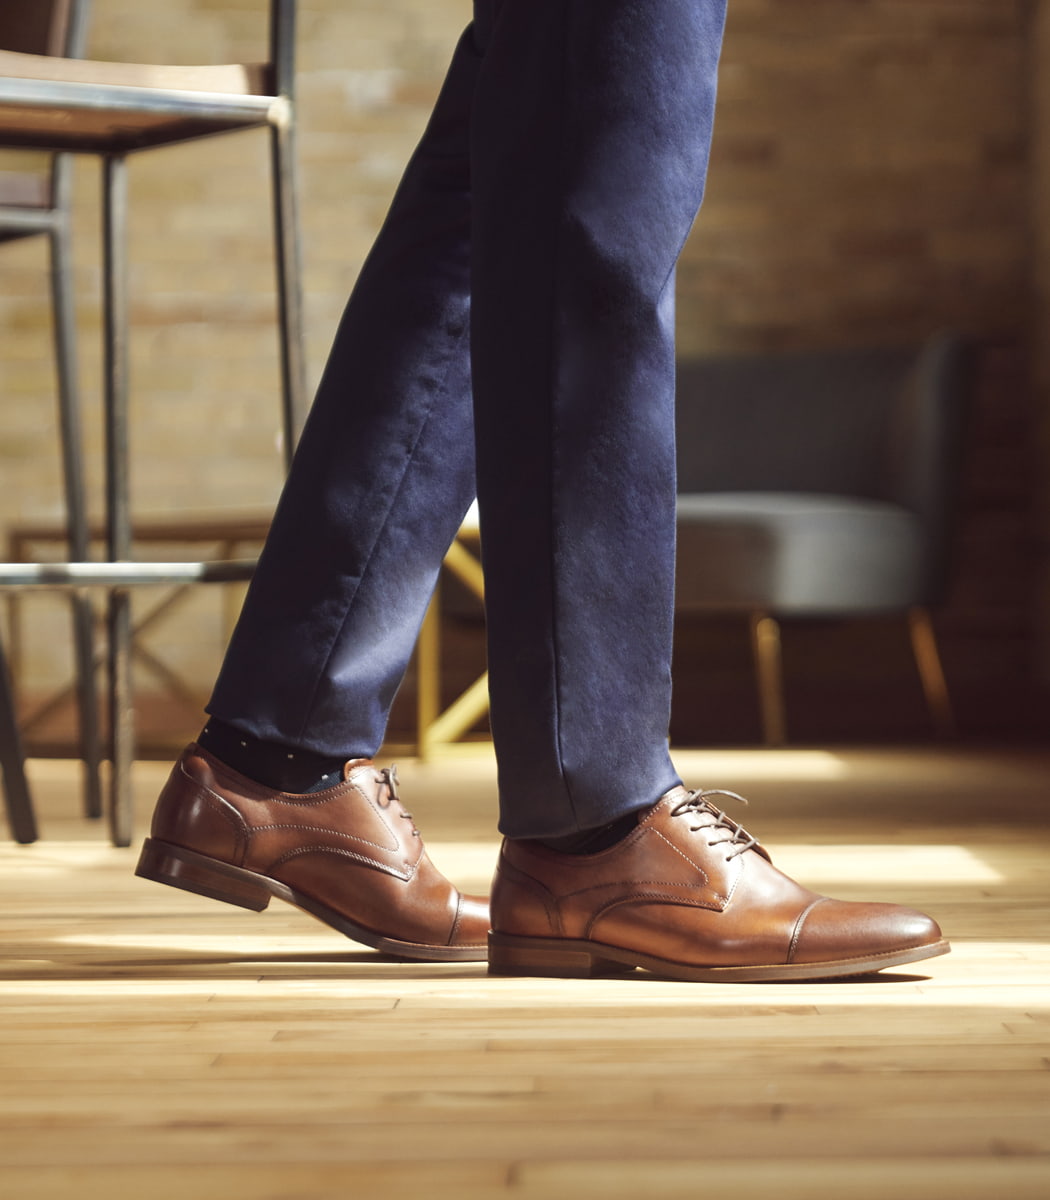 The featured product is the Rucci Cap Toe Oxford in Cognac.